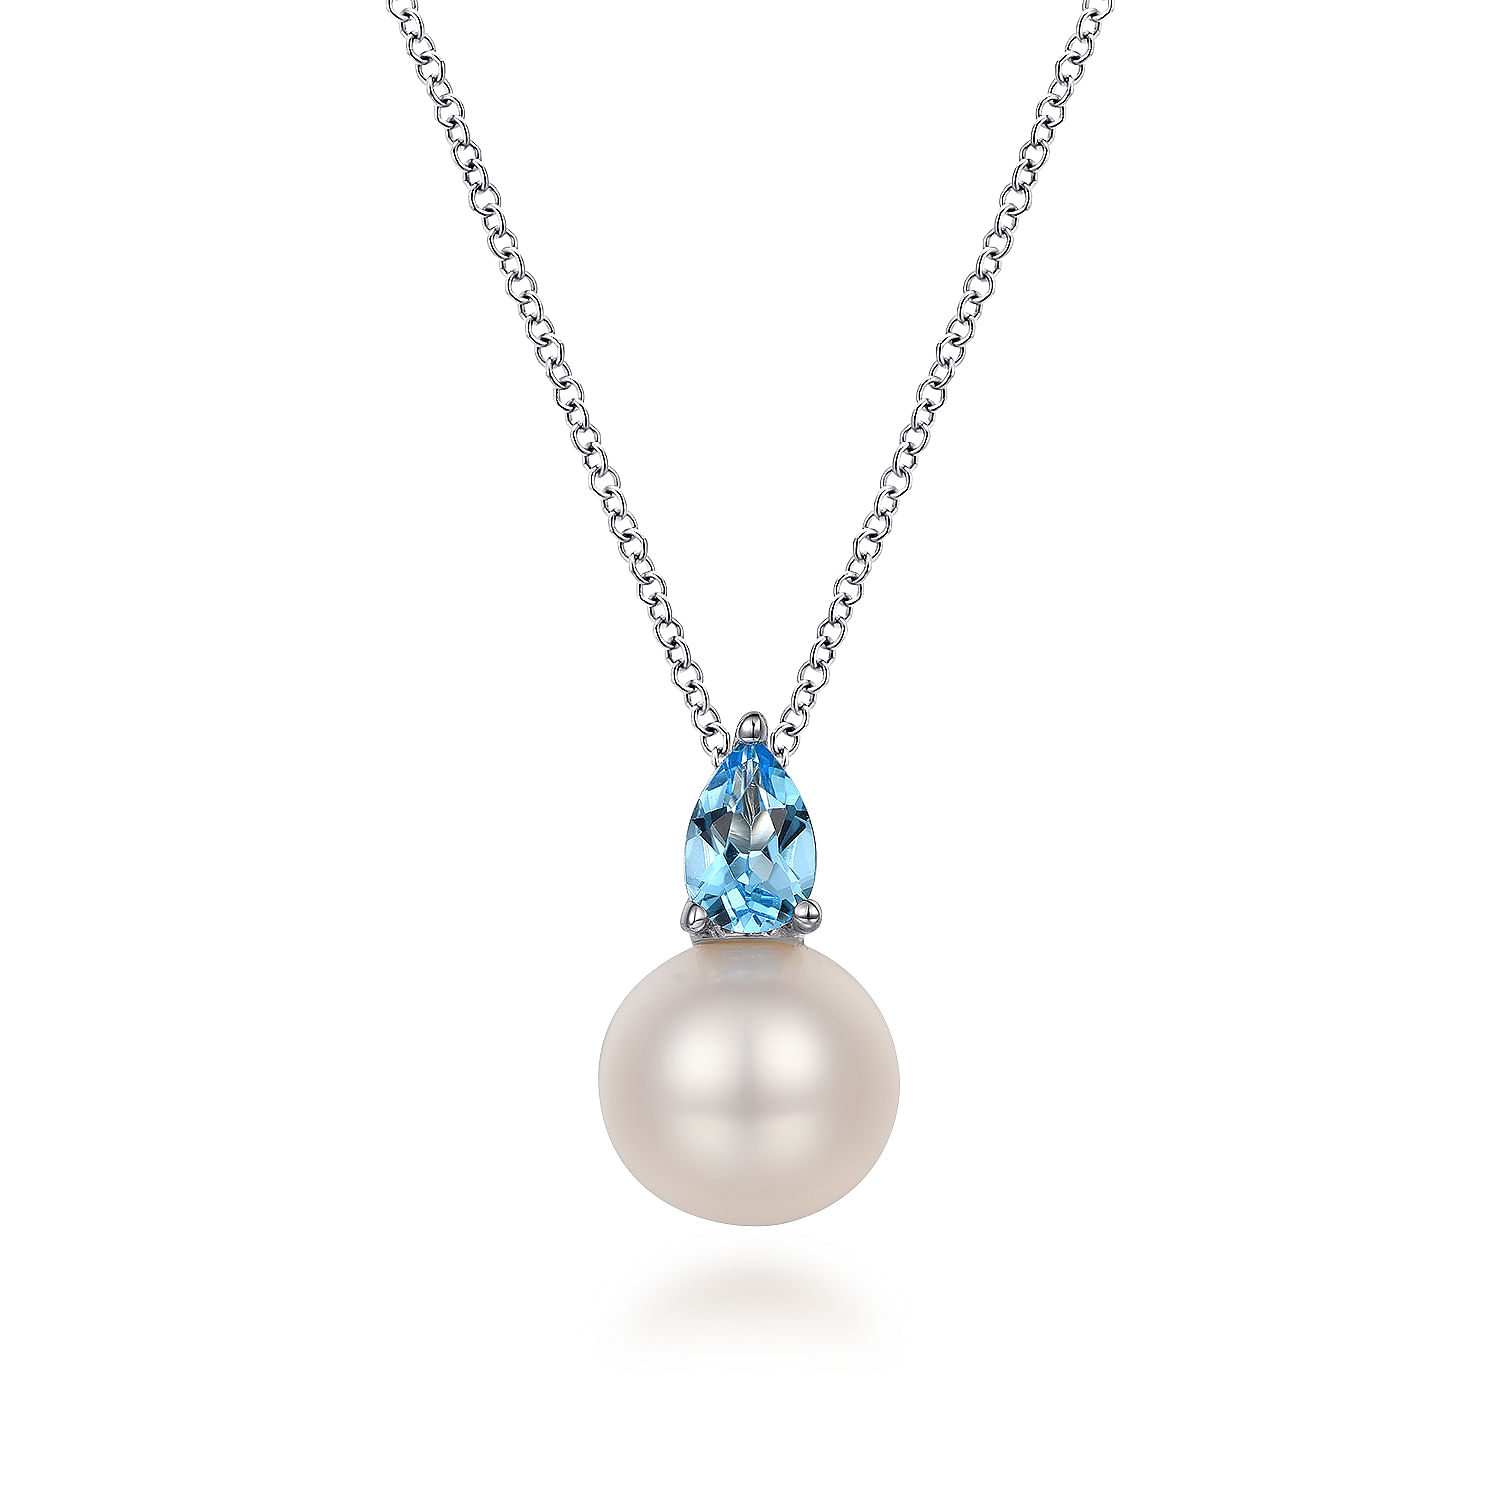 925 Sterling Silver Mother of Pearl and Blue Topaz Pendant Necklace